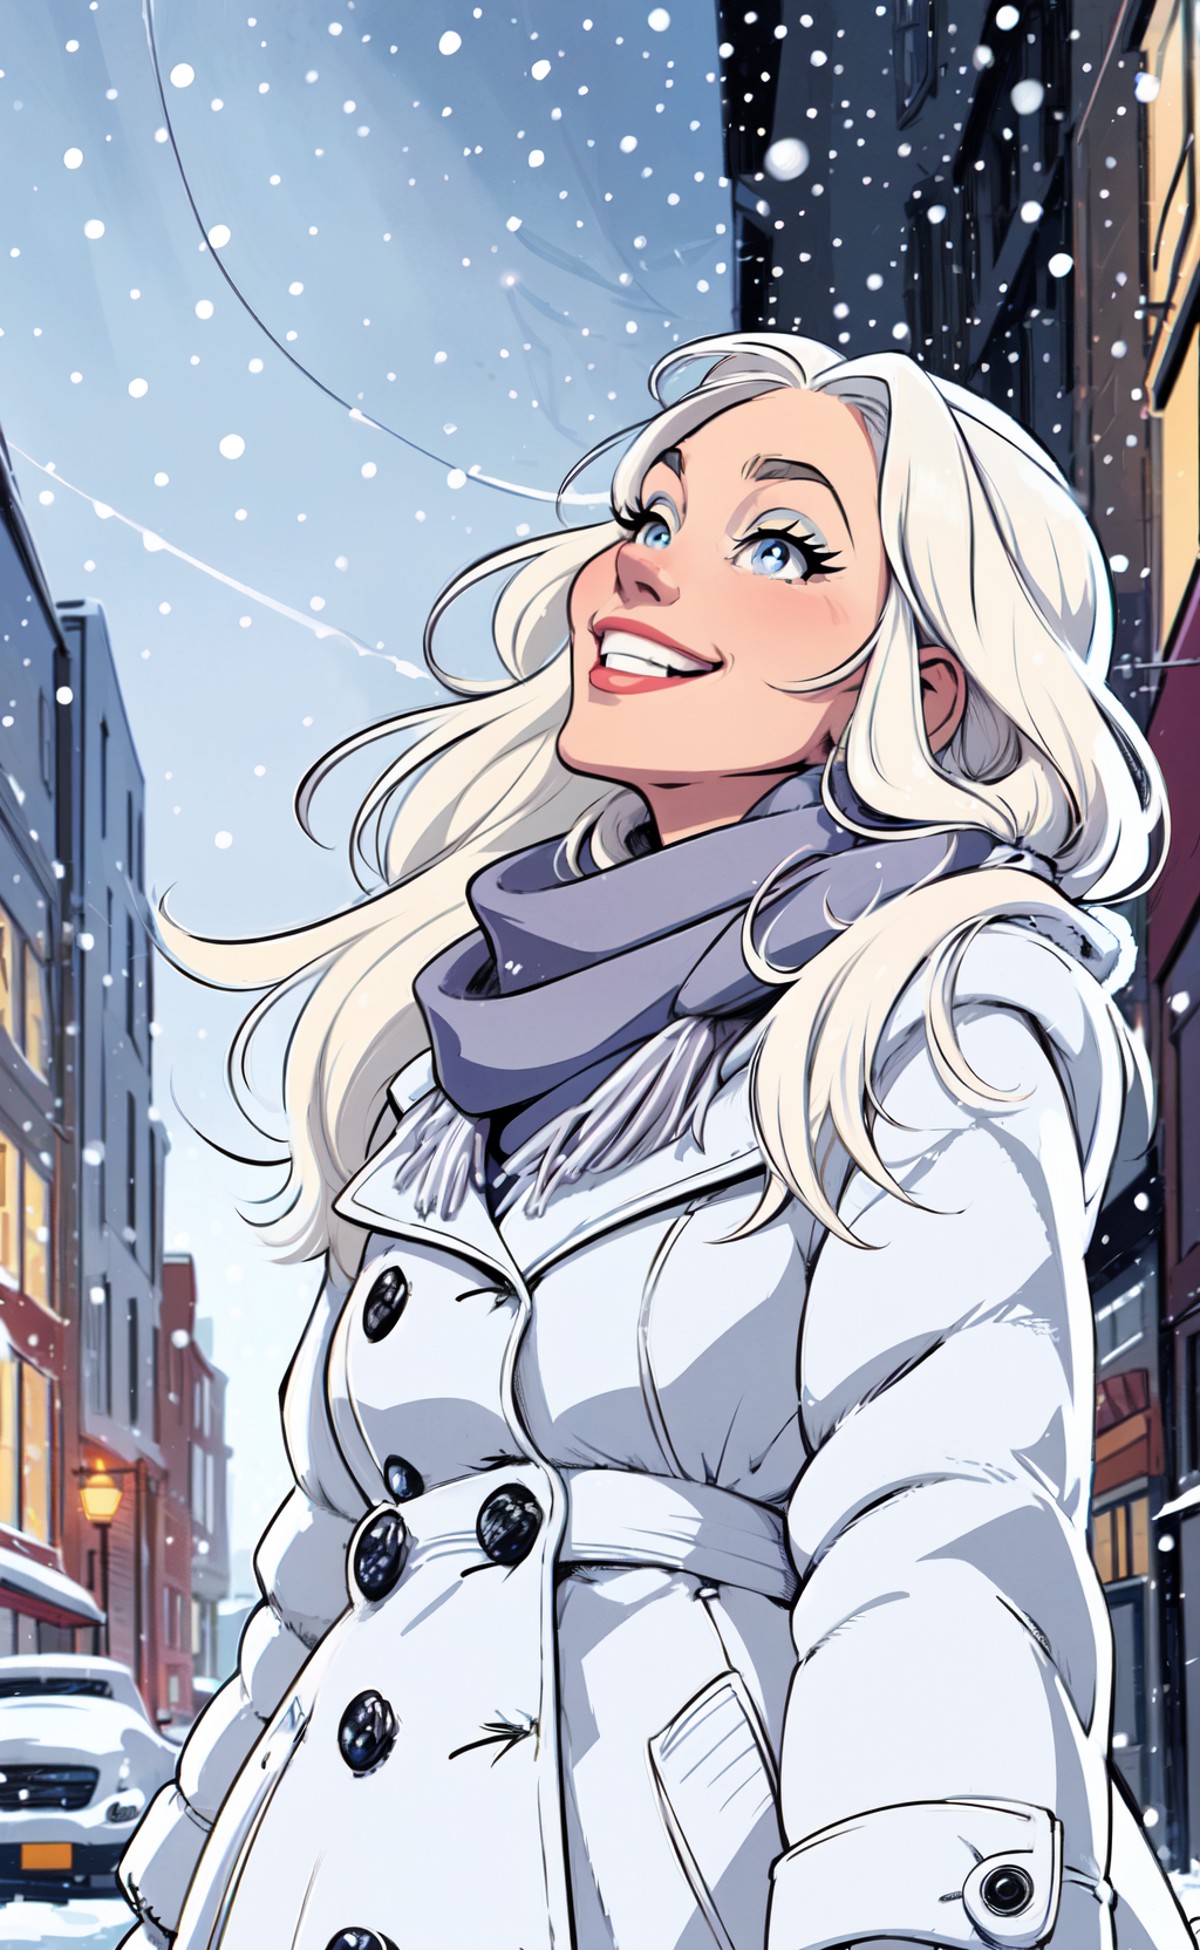 (cartoonish style), flat color style, close up illustration of a woman, on a snowy street, long platinum blonde hair blowi...